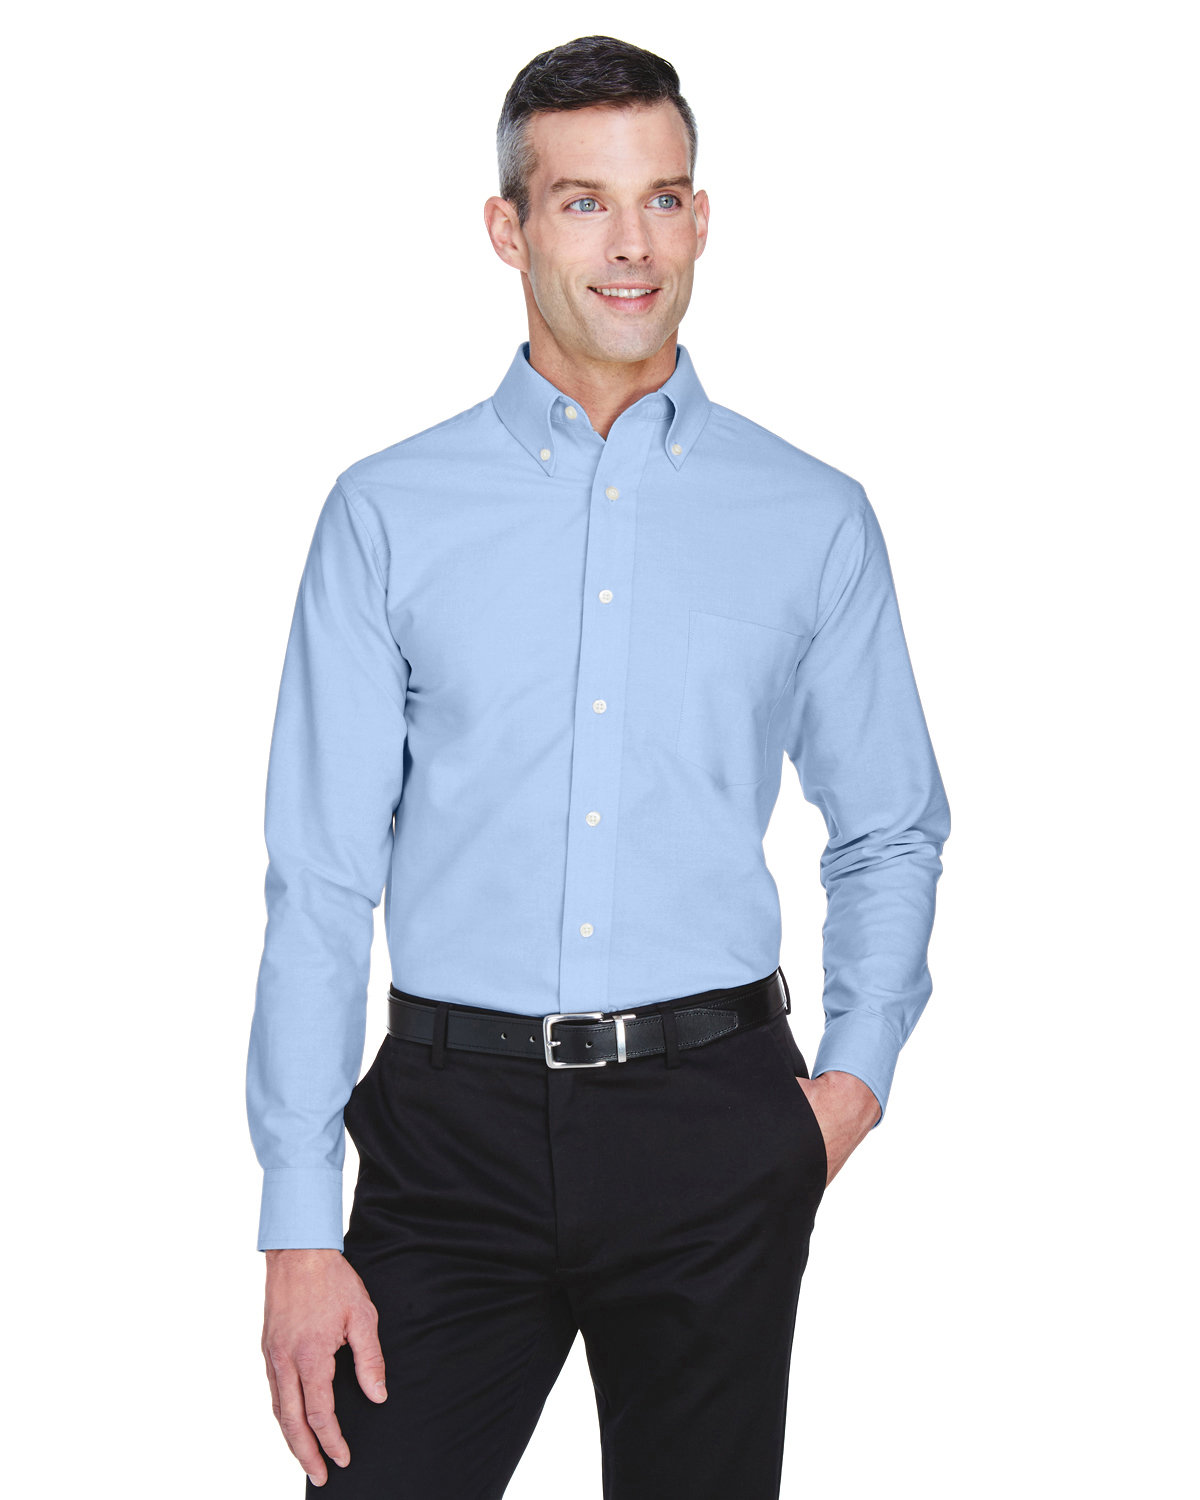 UltraClub Men's Classic Wrinkle-Resistant Short-Sleeve Oxford – Publix  Company Store by Partner Marketing Group